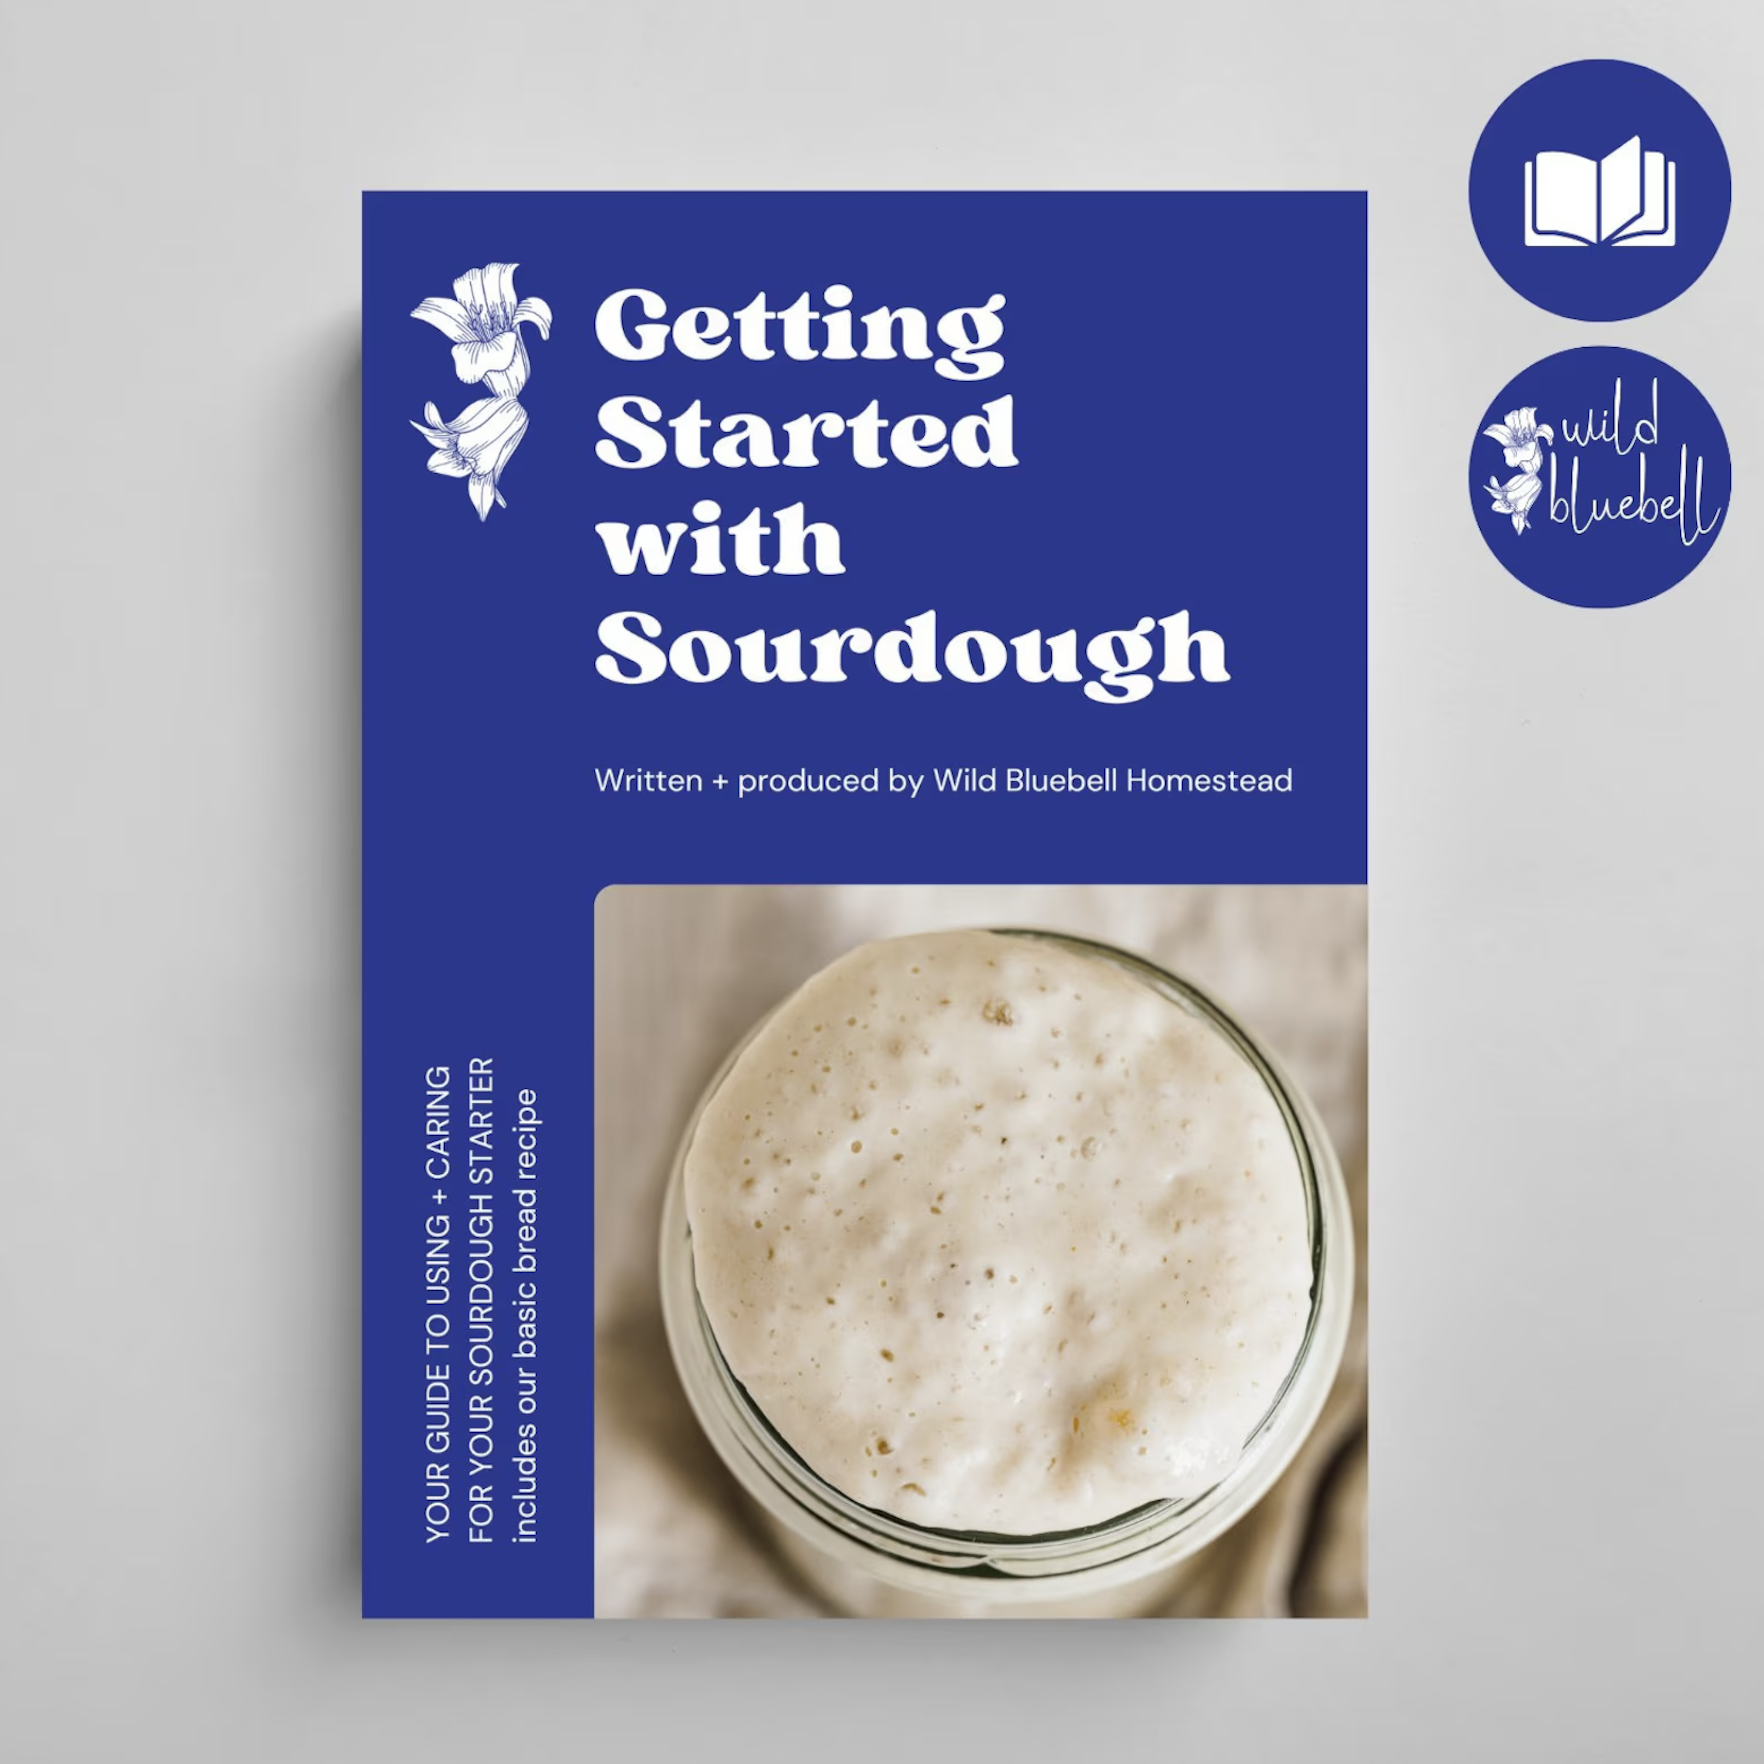 Buy Sourdough Starter Guide eBook PDF Download Online with Easy Step-by-Step Instructions for Beginners